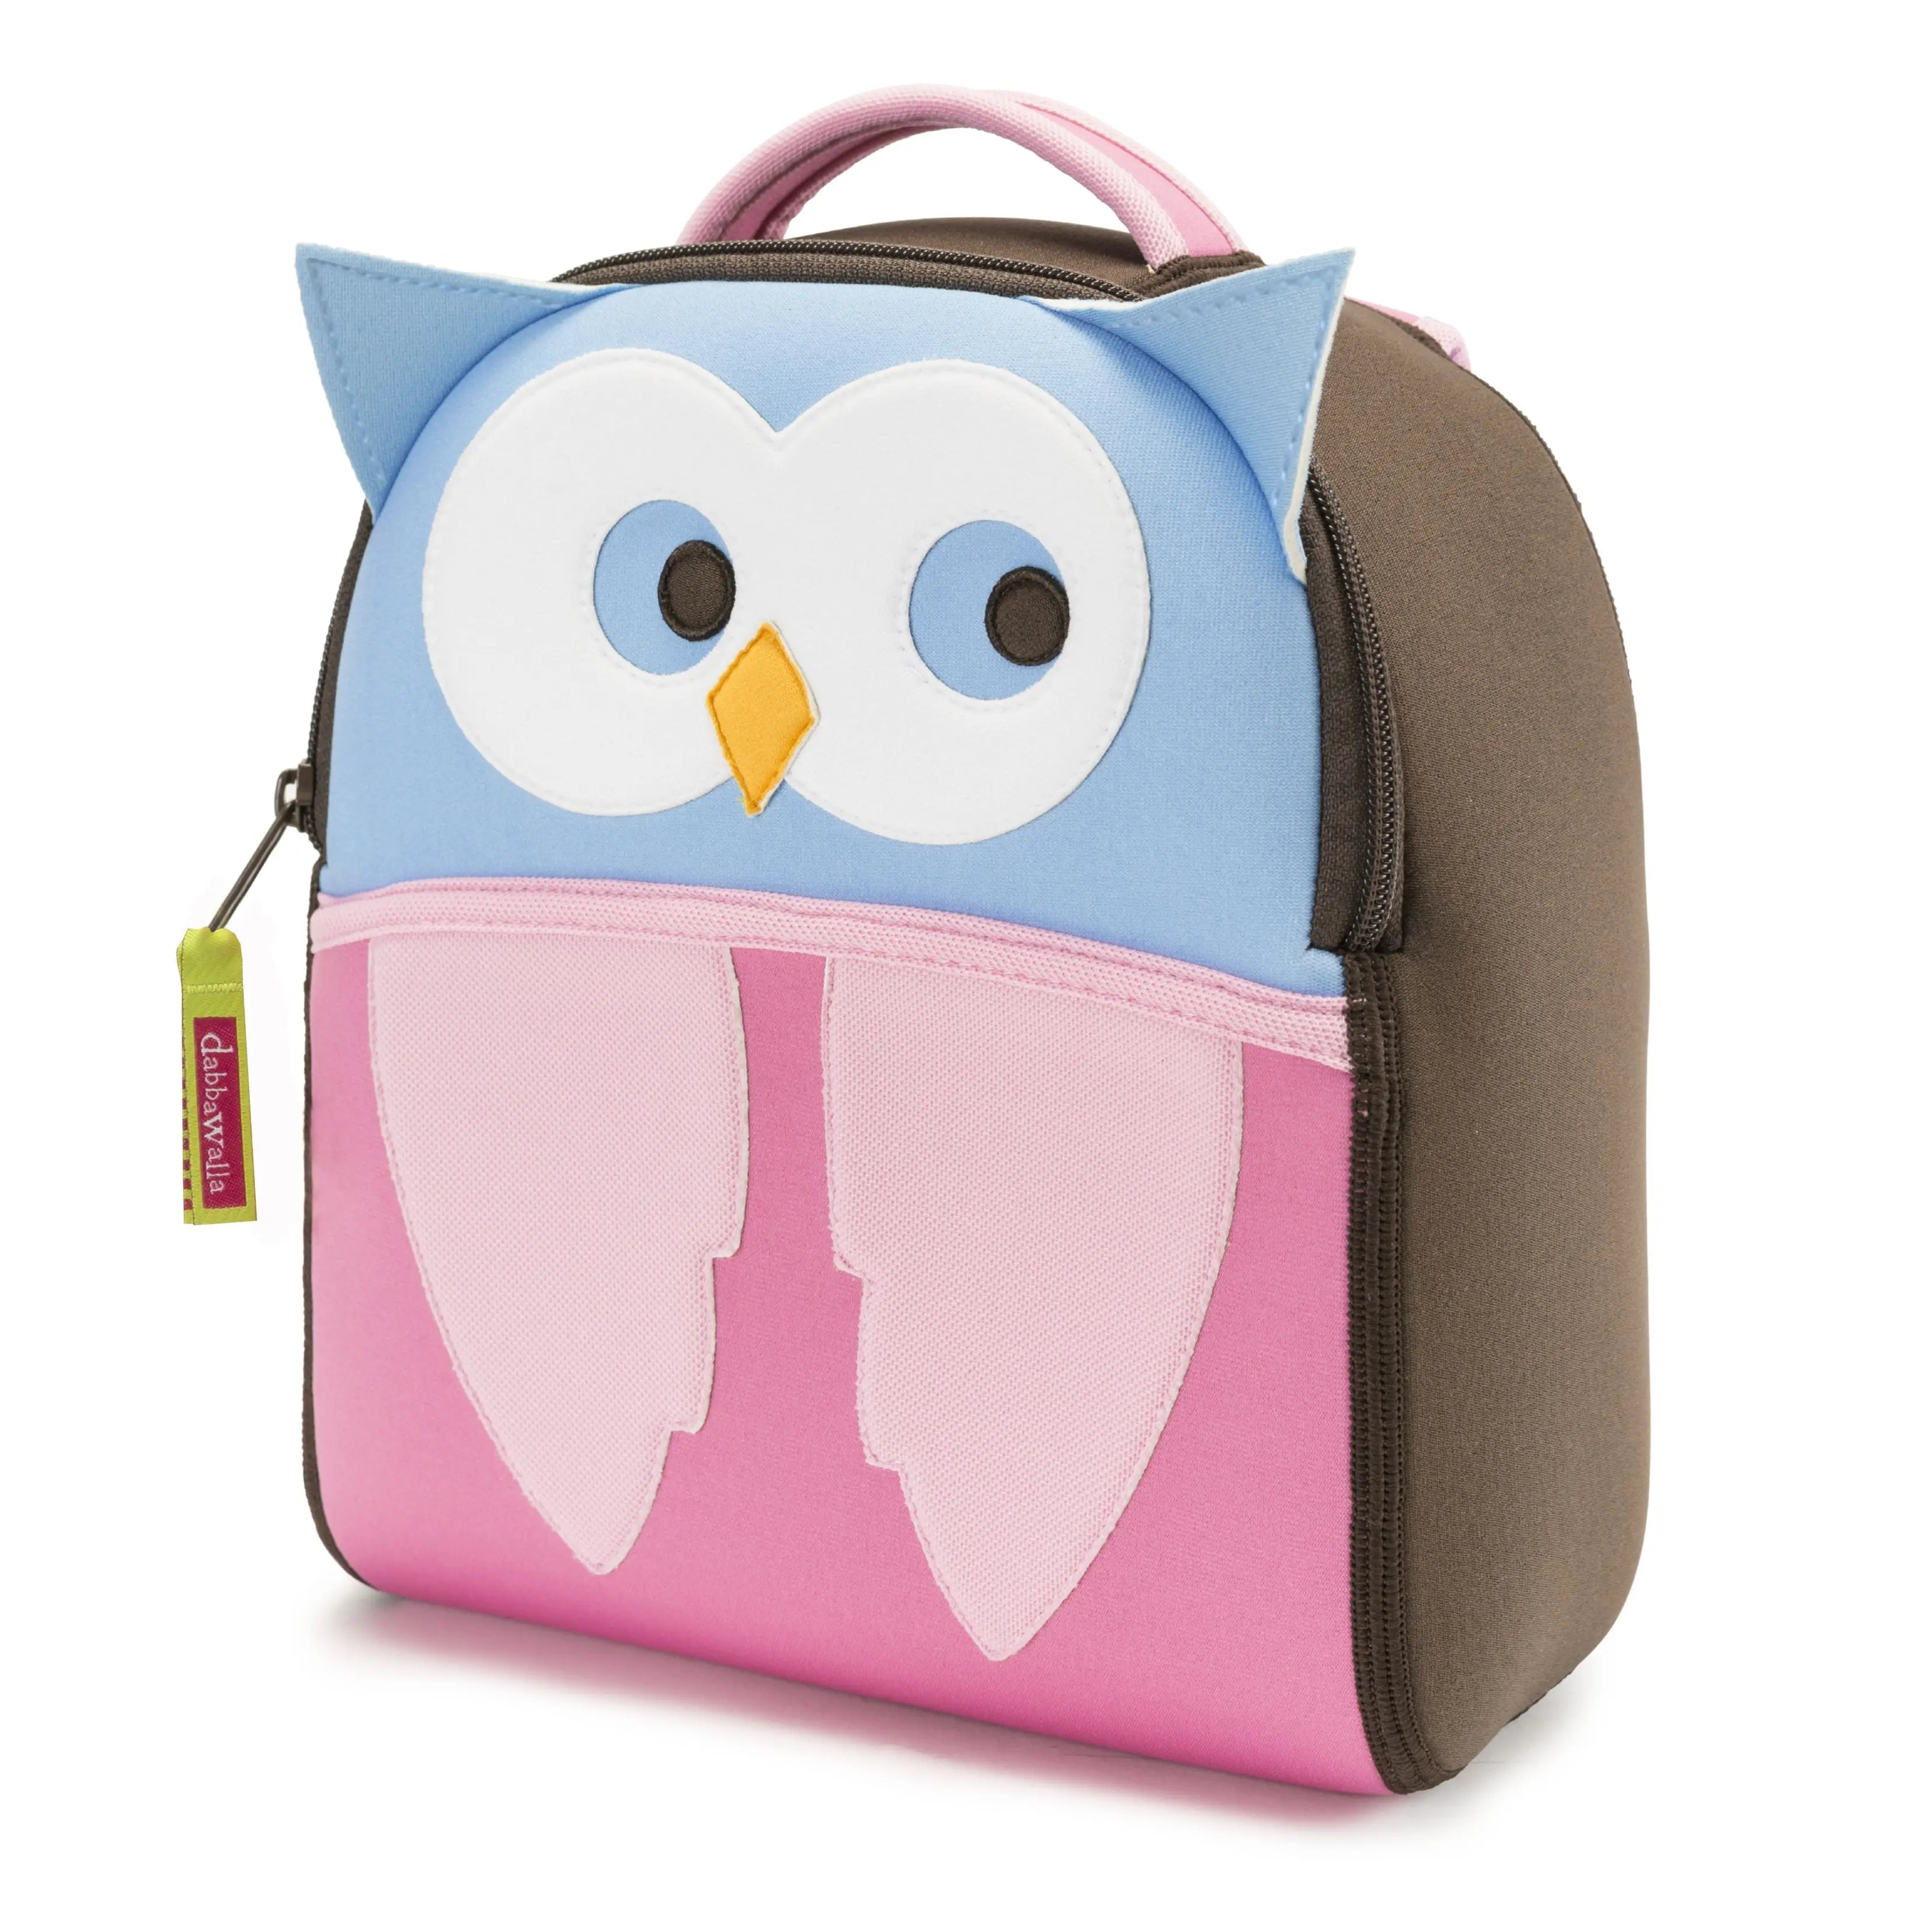 Hoot Owl Harness Toddler Backpack - Brown and Pink,Safety Harness Toddler Harness BP Dabbawalla   